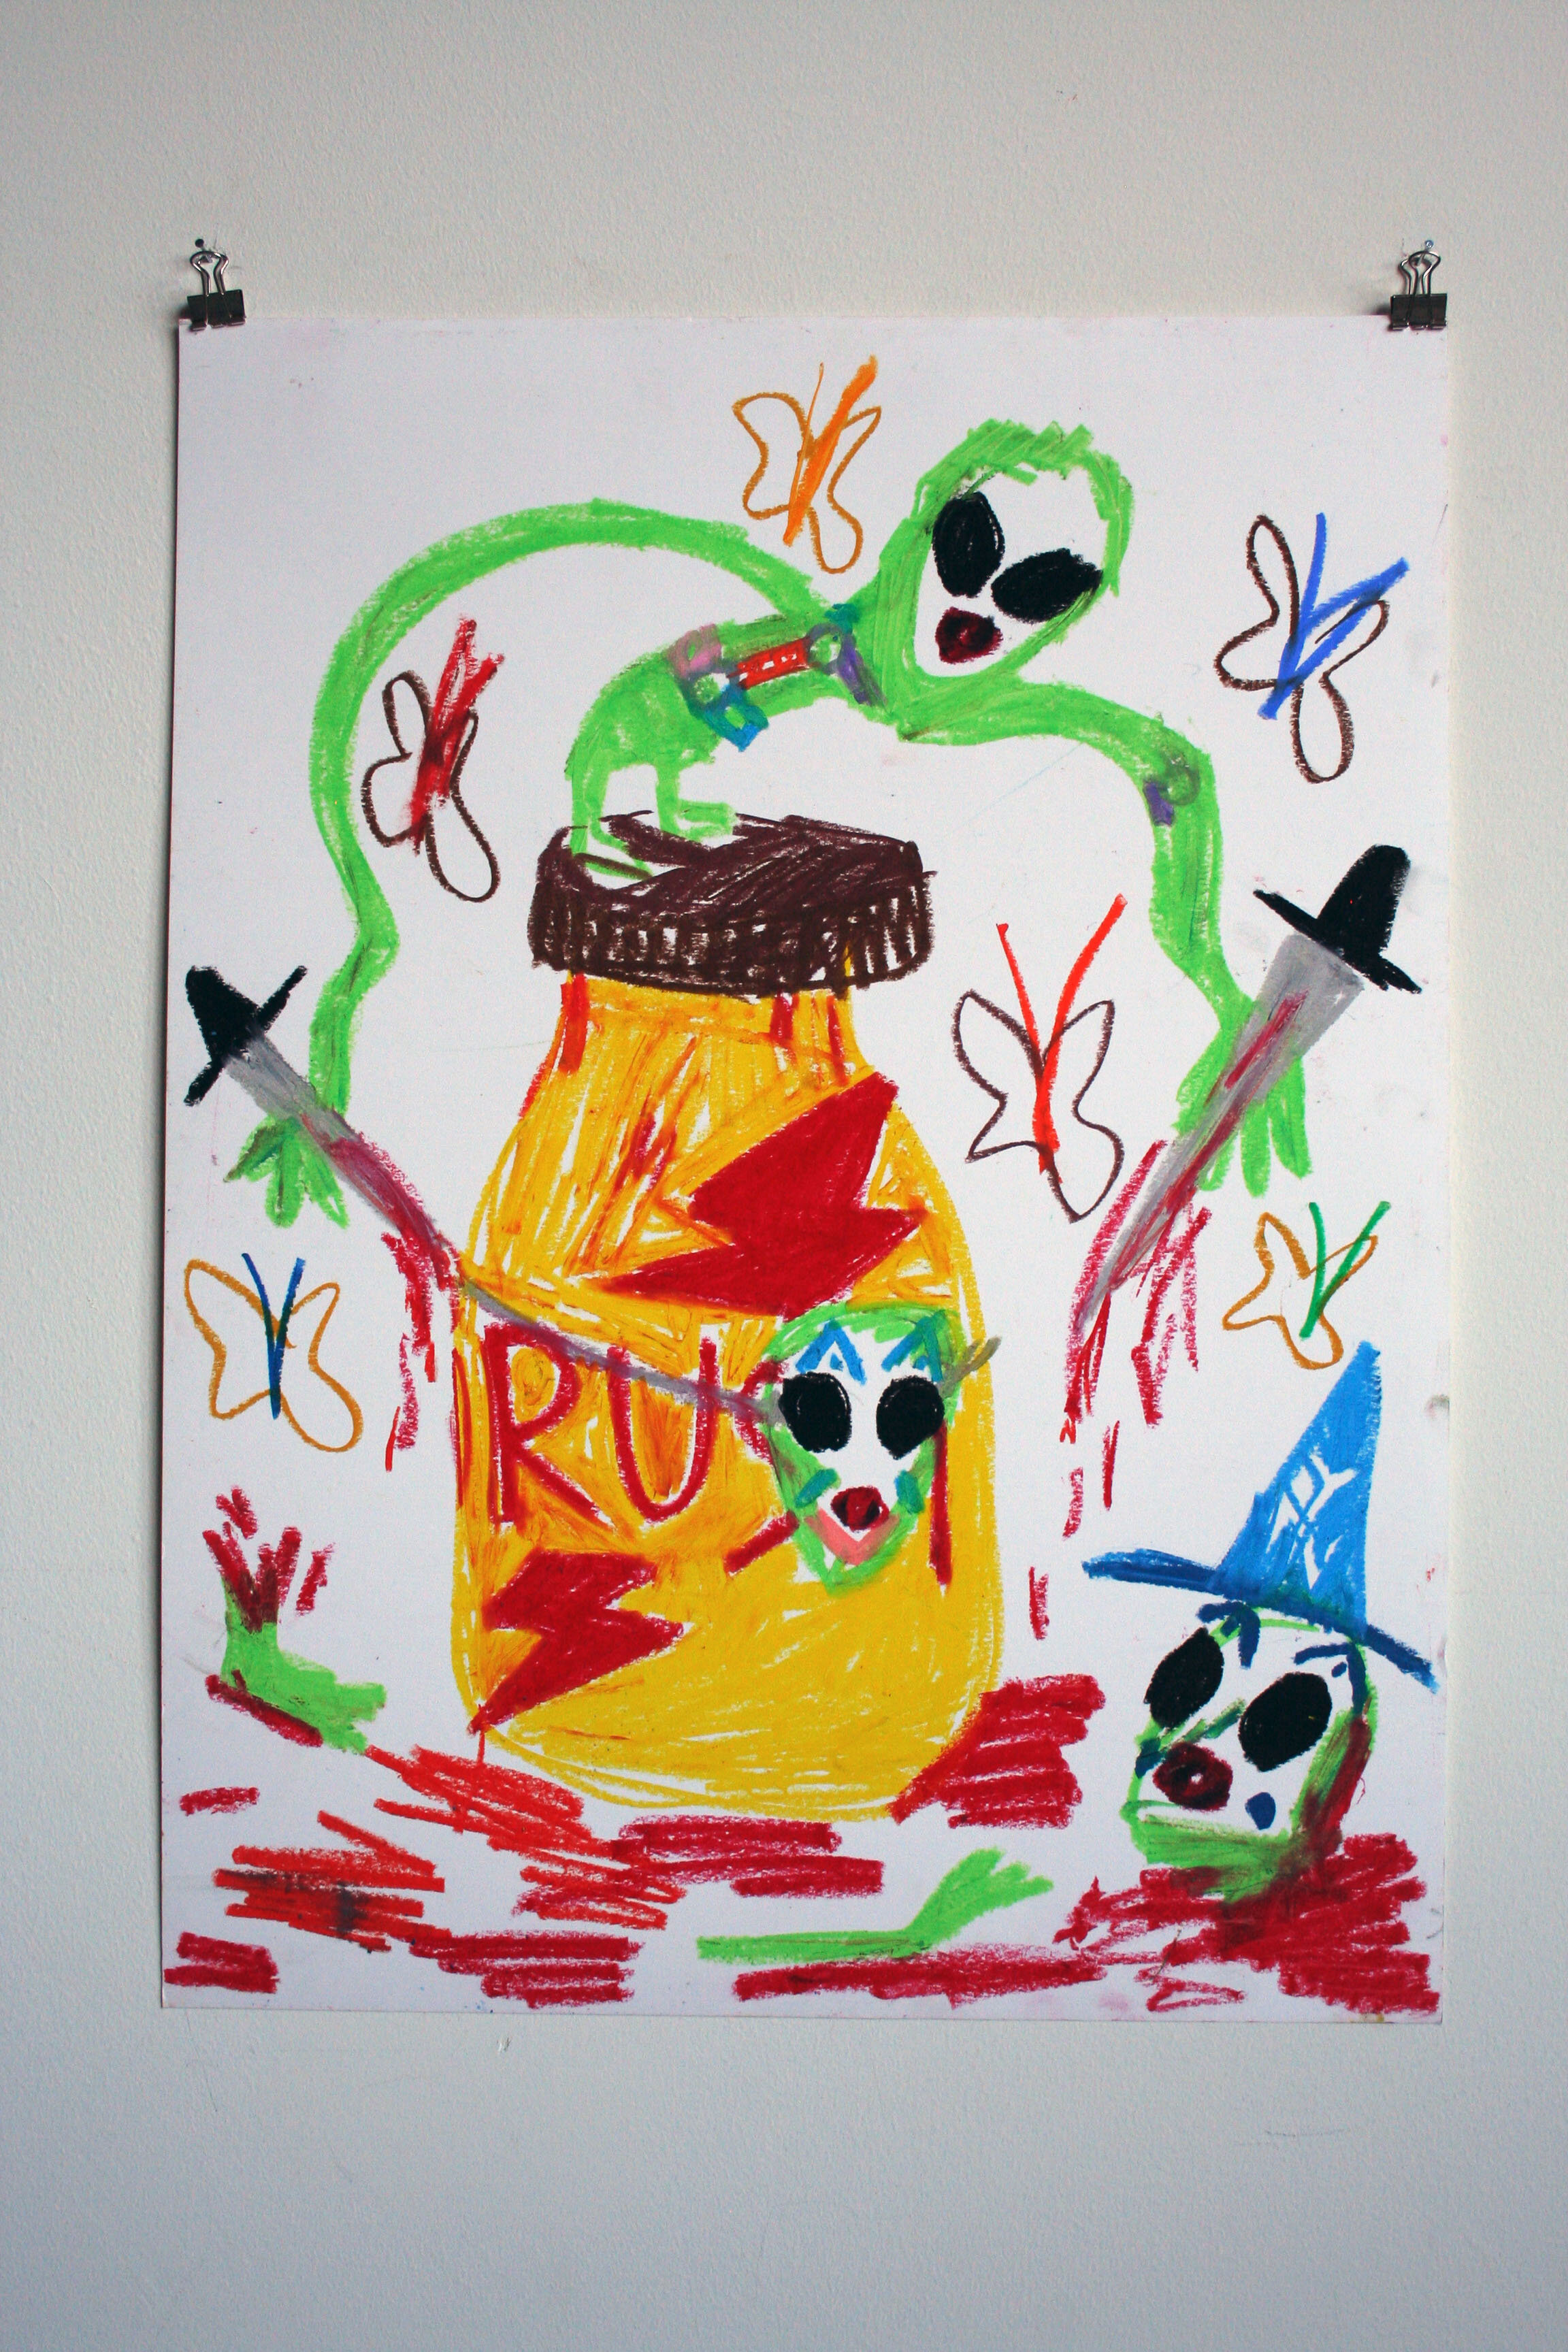   The Aliens Use the Poppers as a Stage,  2014  24 x 18 inches (60.96 x 45.72 cm.)  Oil pastel on paper 